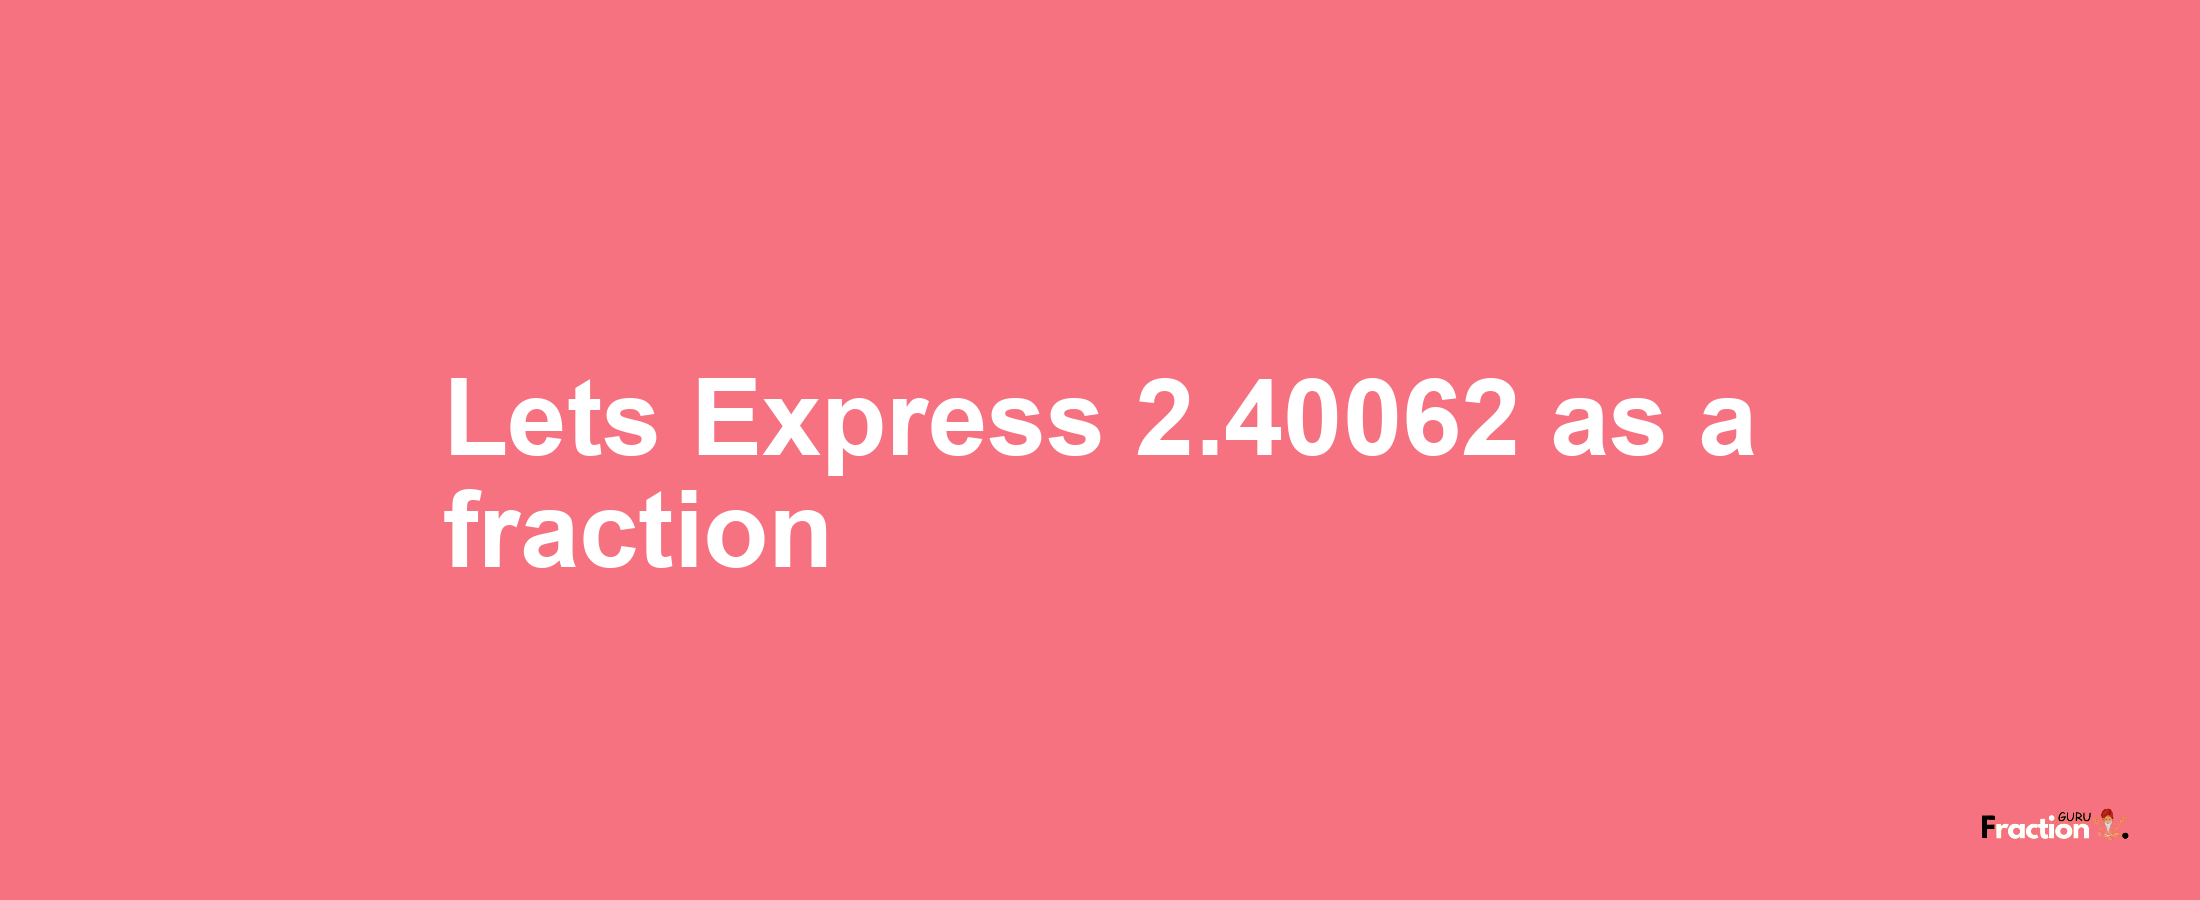 Lets Express 2.40062 as afraction